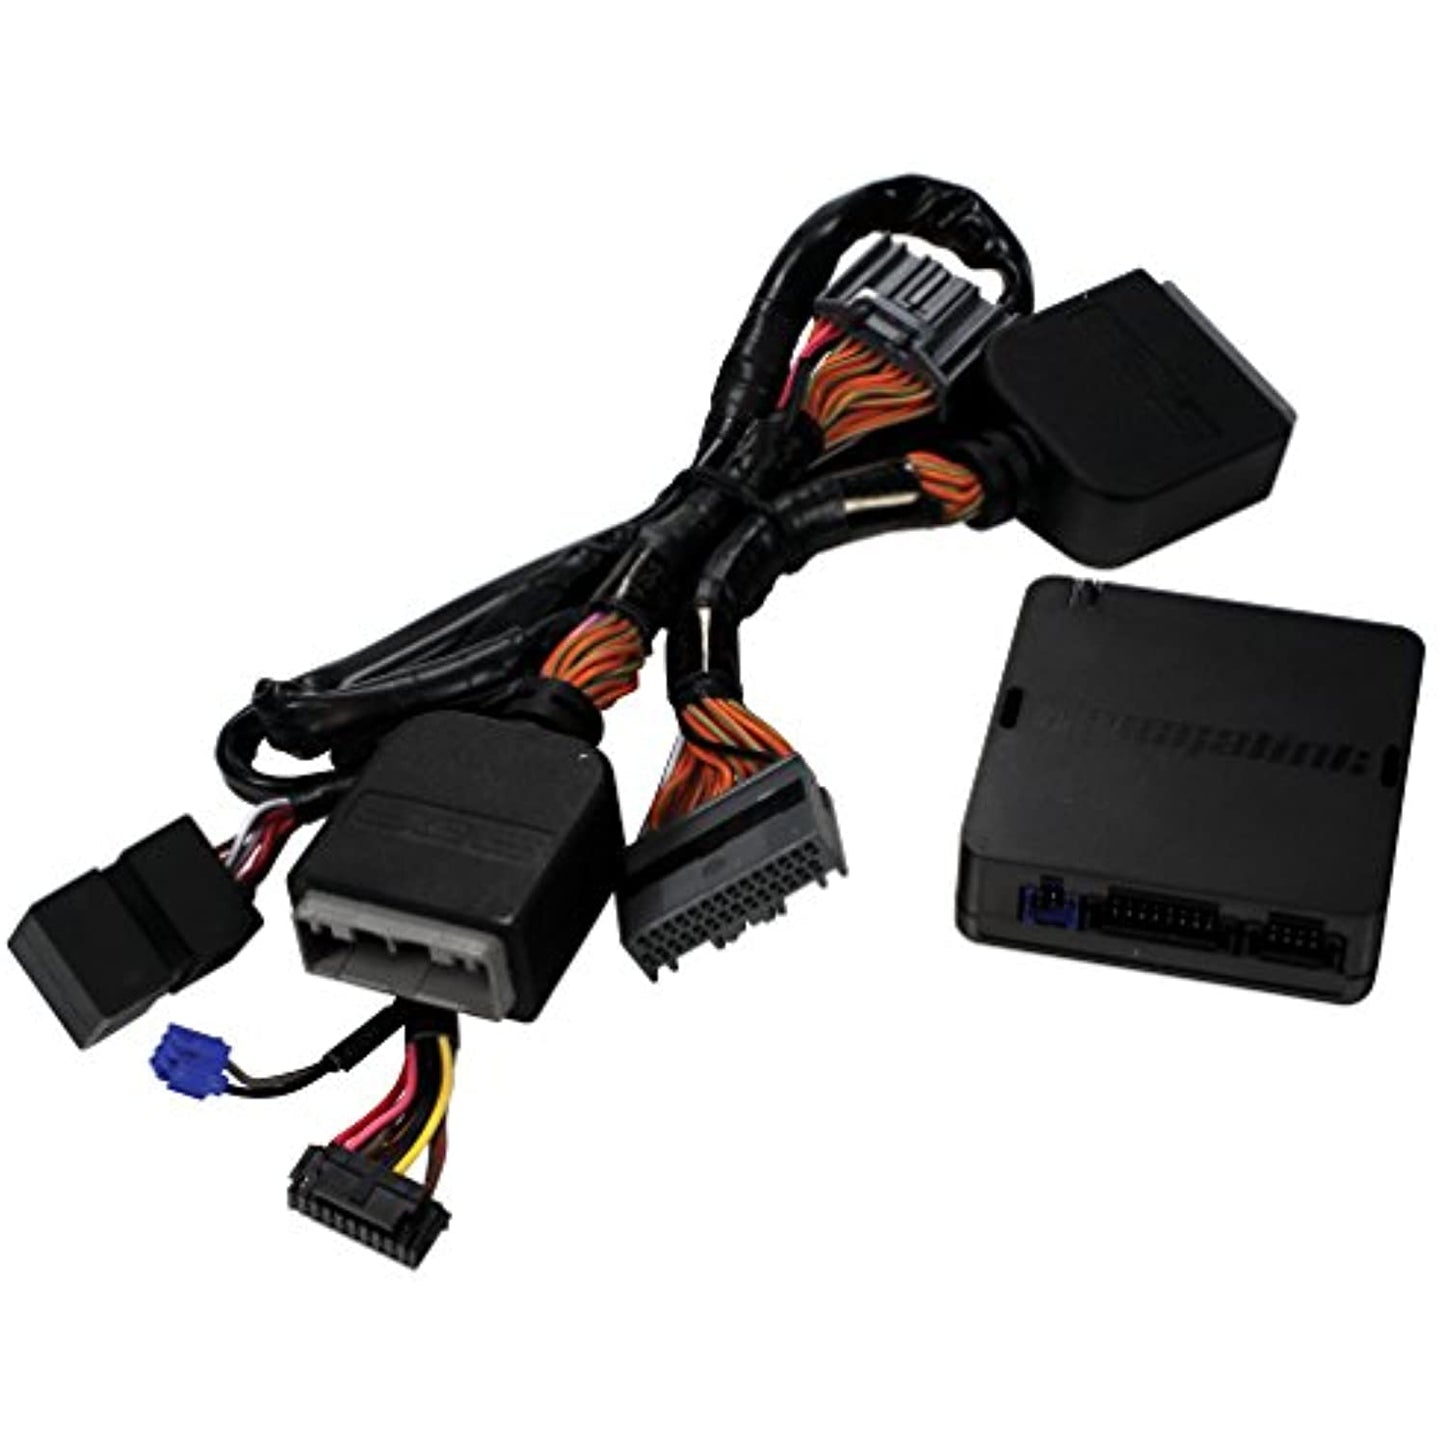 Omega OLRSHA6 Remote Starter System for 2013 and Up Honda/Acura Vehicles